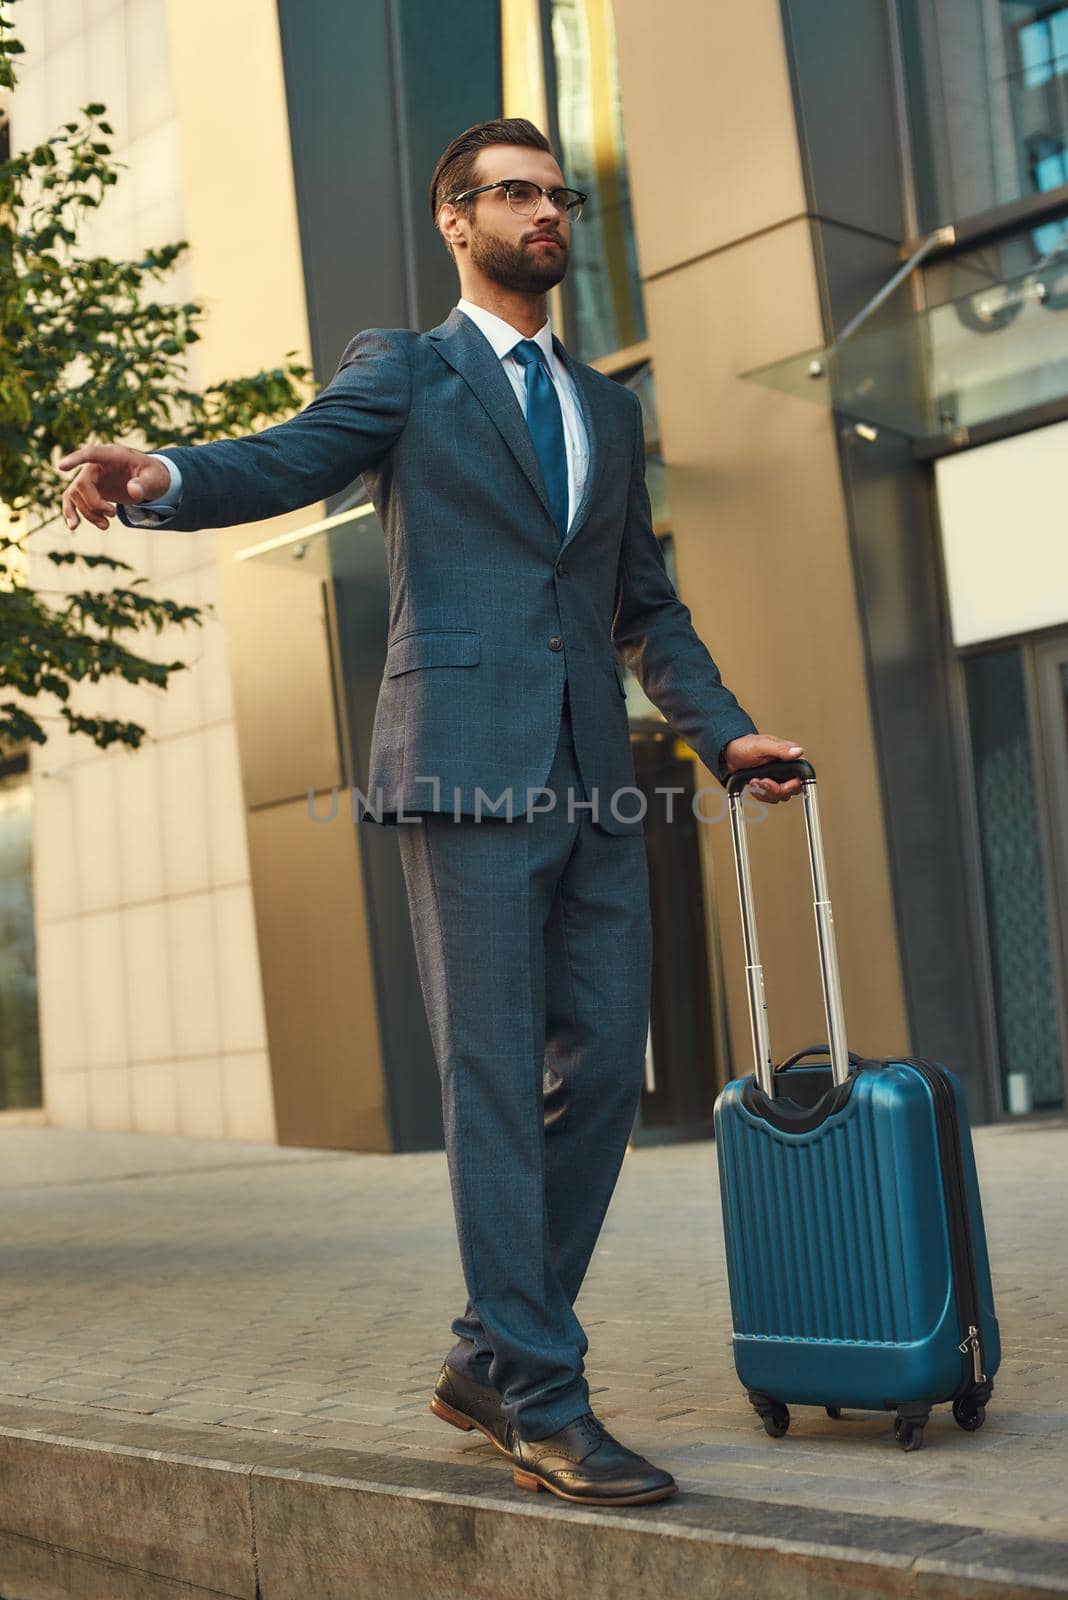 Catching taxi. Full length of young and handsome bearded man in suit carrying suitcase and raising his arm while standing outdoors by friendsstock